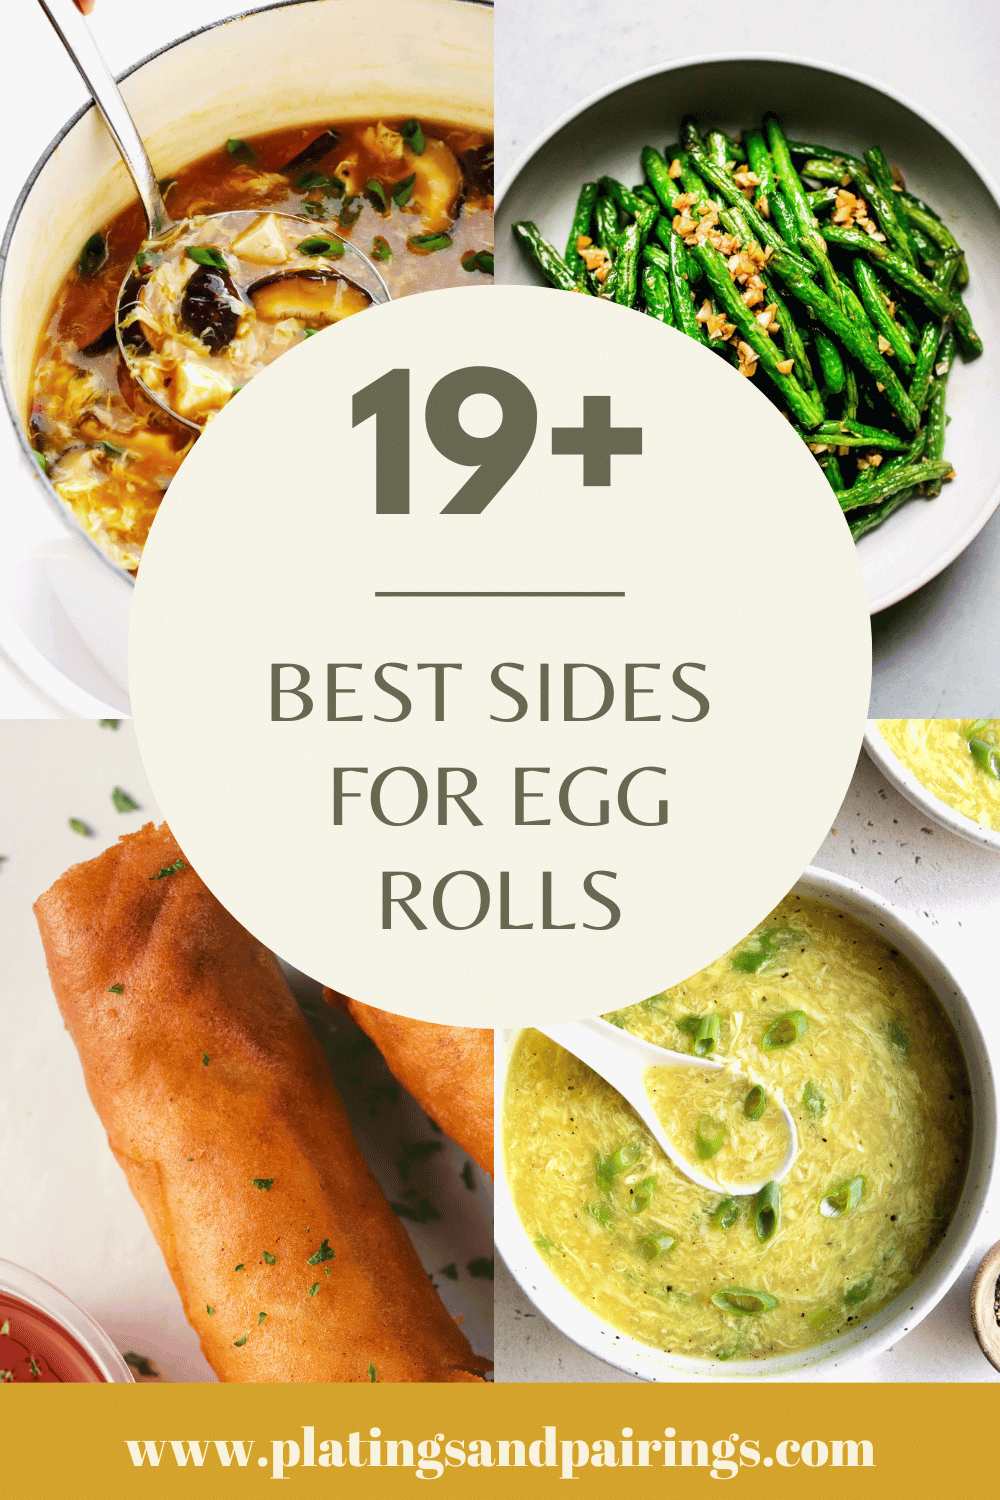 Collage of sides for egg rolls with text overlay.